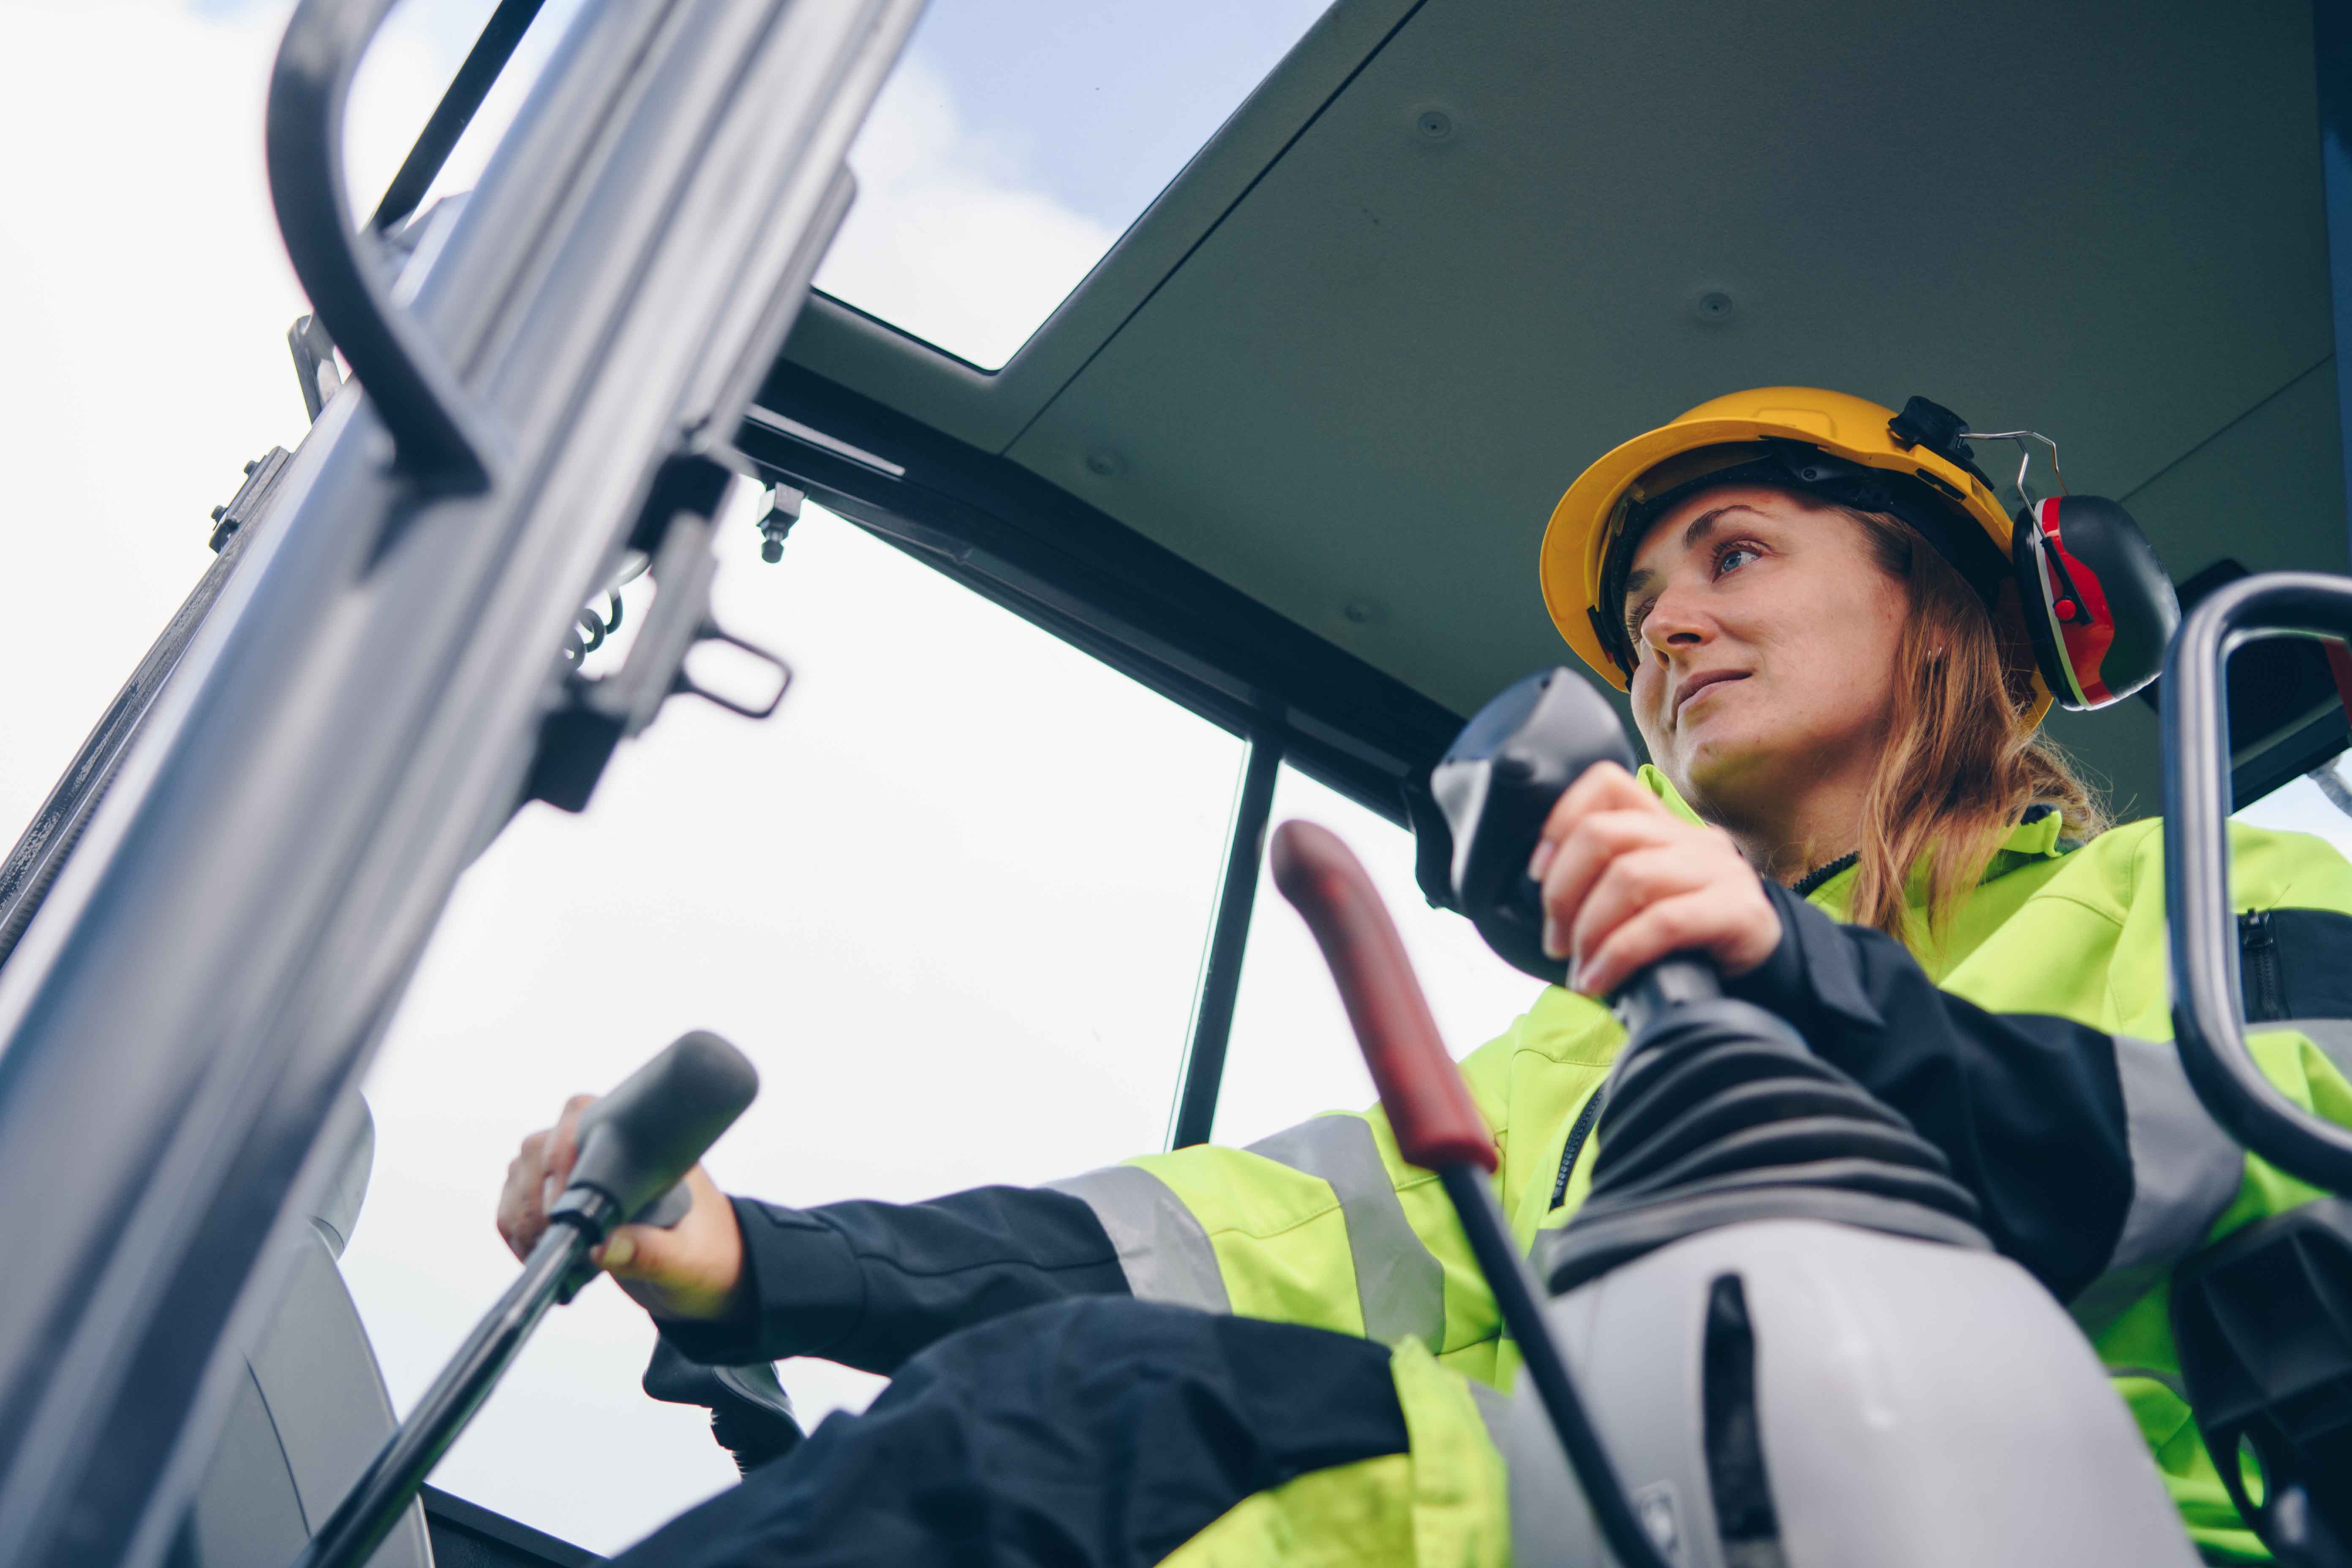 Labour Shortage: Our Top 3 Tips for Hiring During the Construction Peak Season